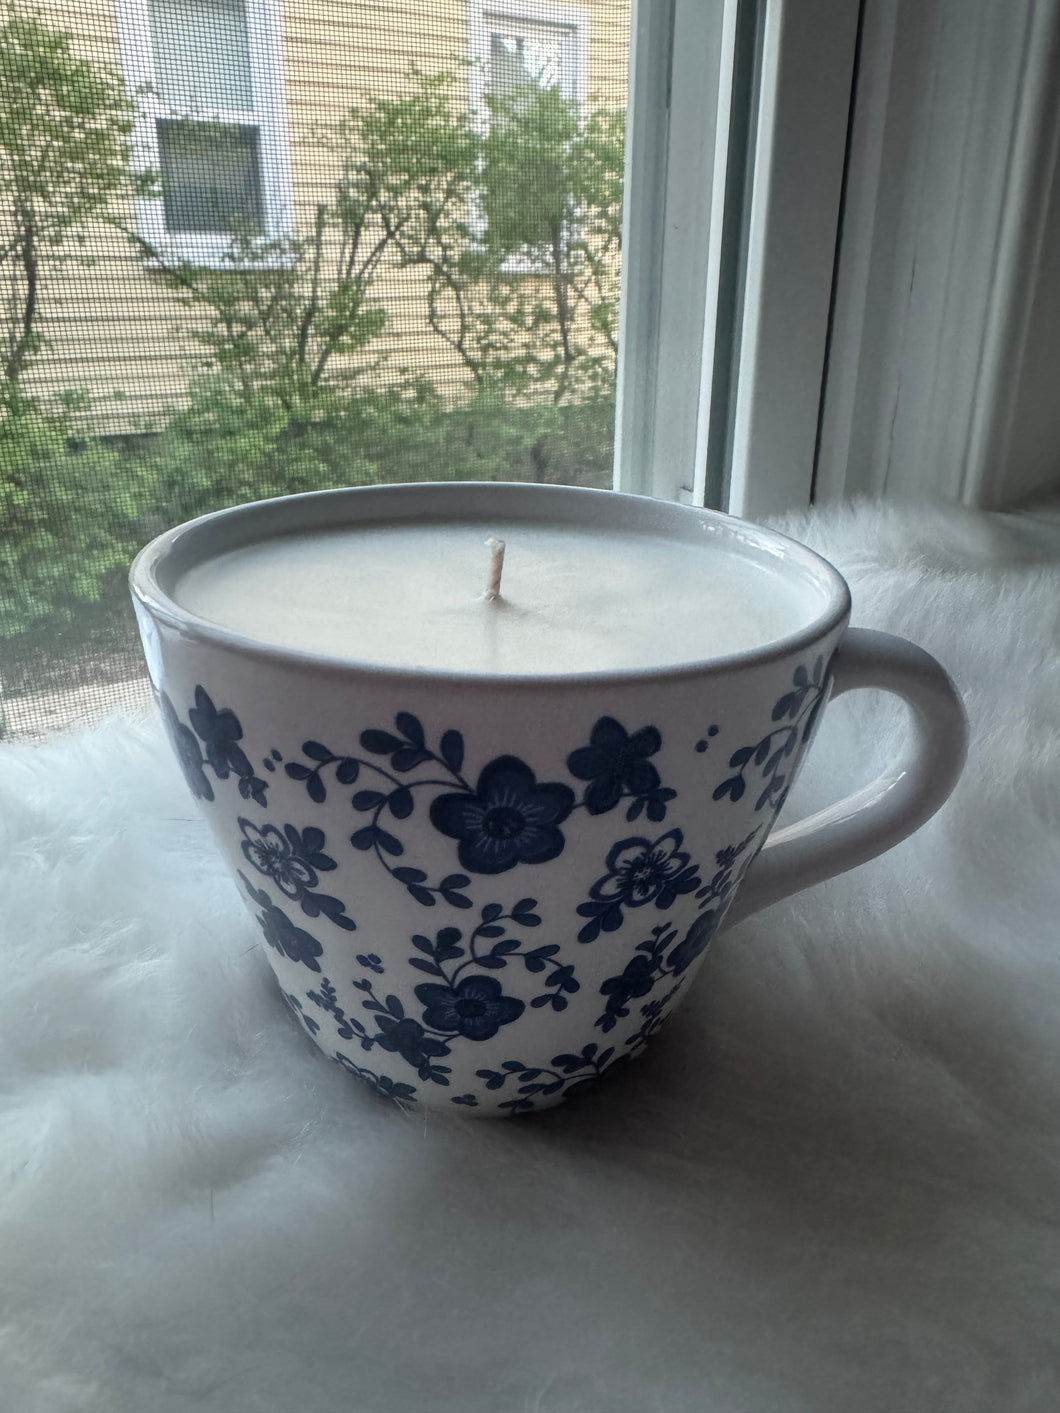 Blue and white floral mug candle